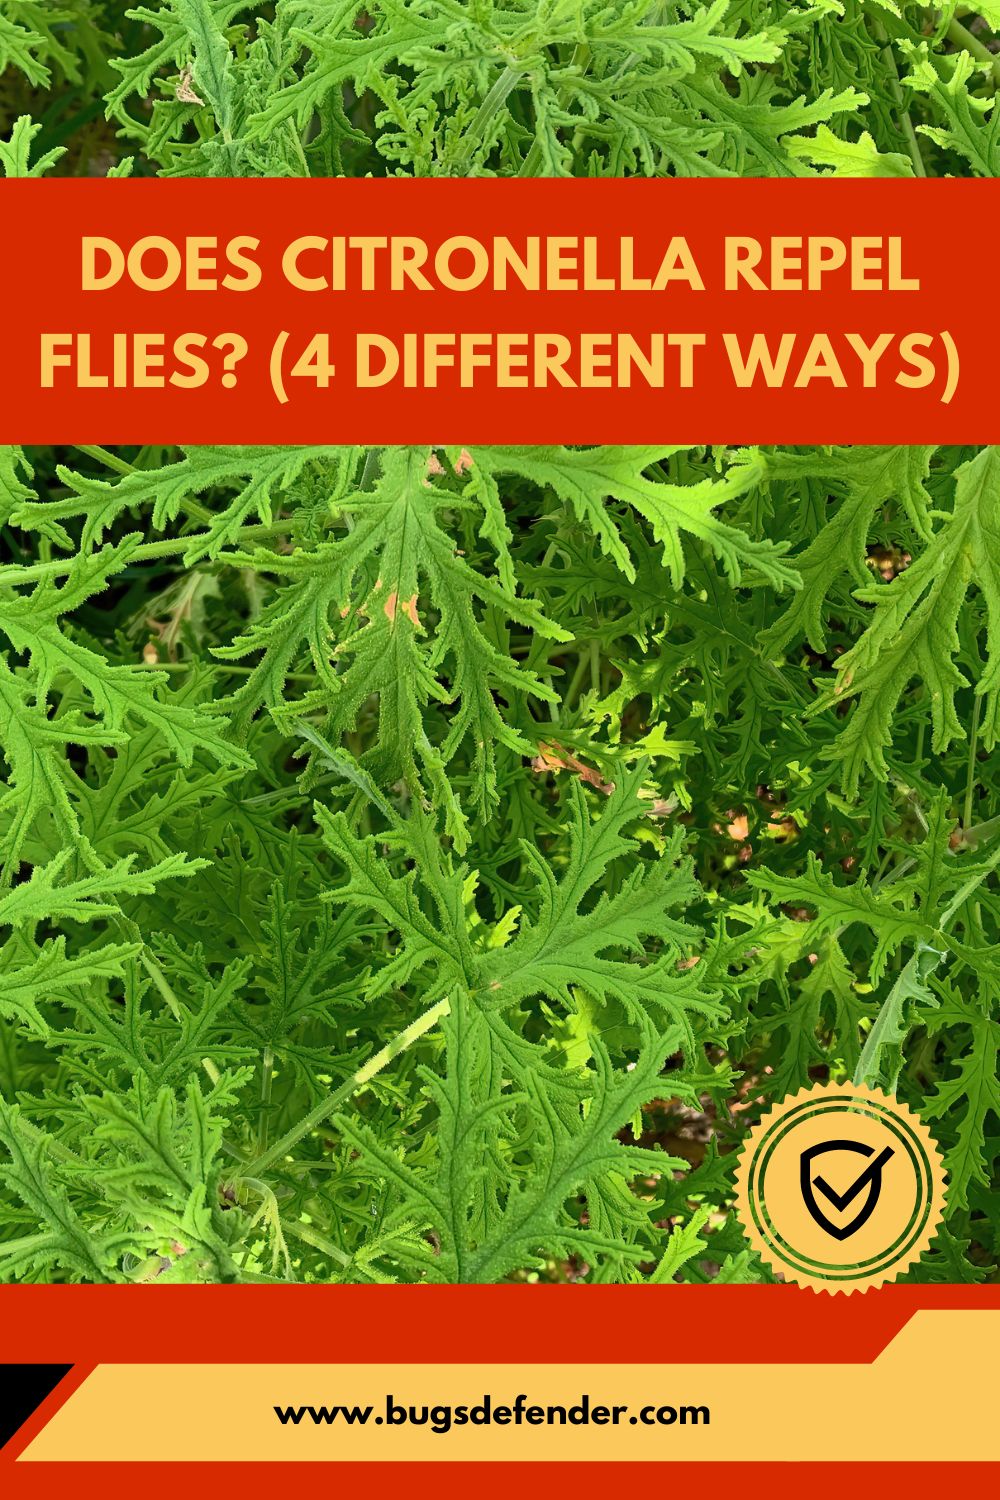 Does Citronella Repel Flies? (4 Different Ways) pin2